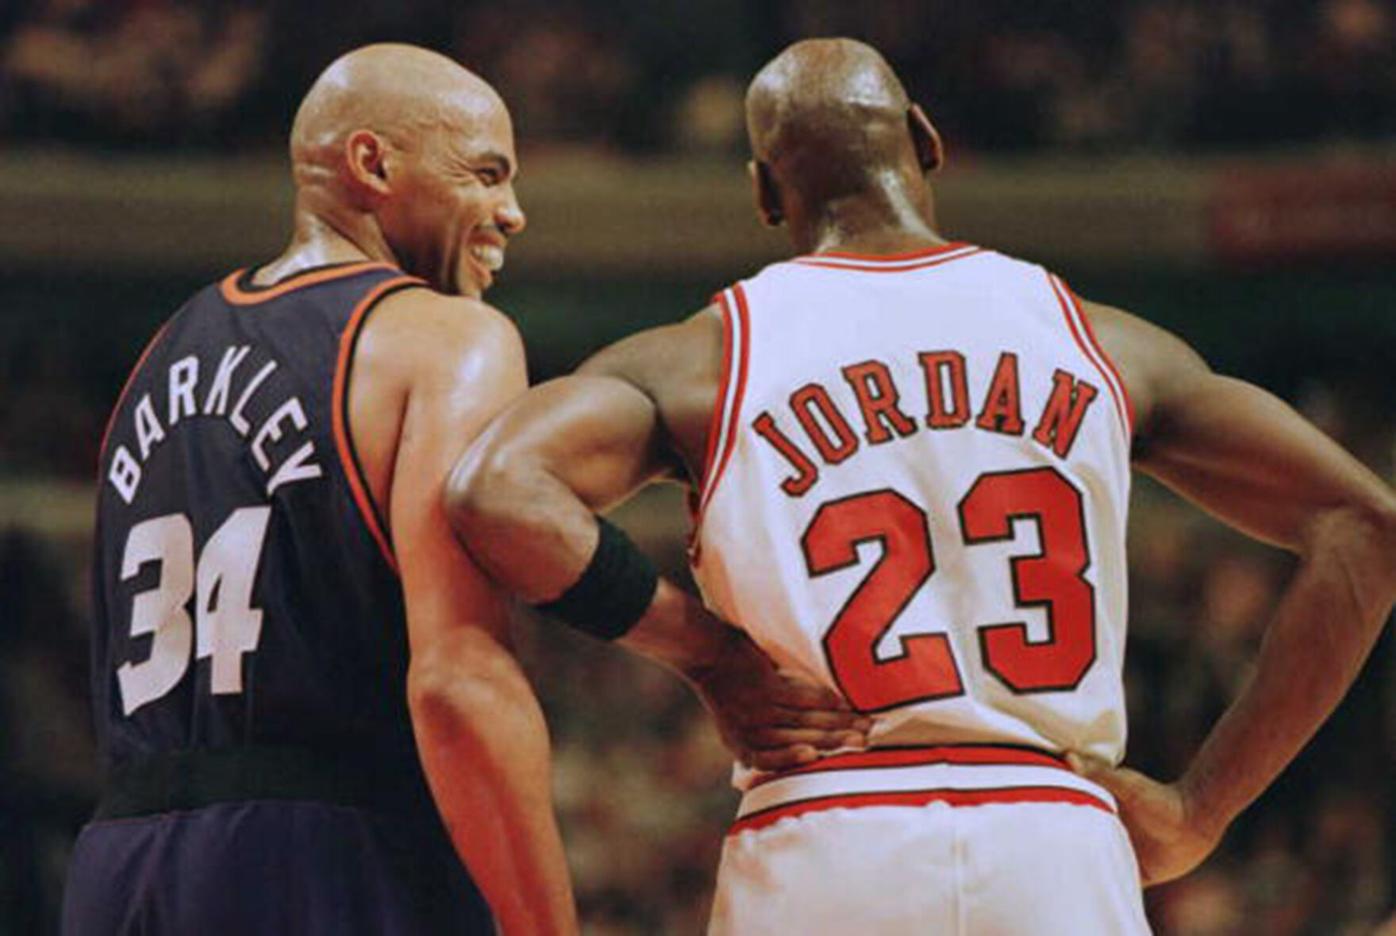 The Game Michael Jordan DROPPED 54 Points with CLUTCH SHOT vs